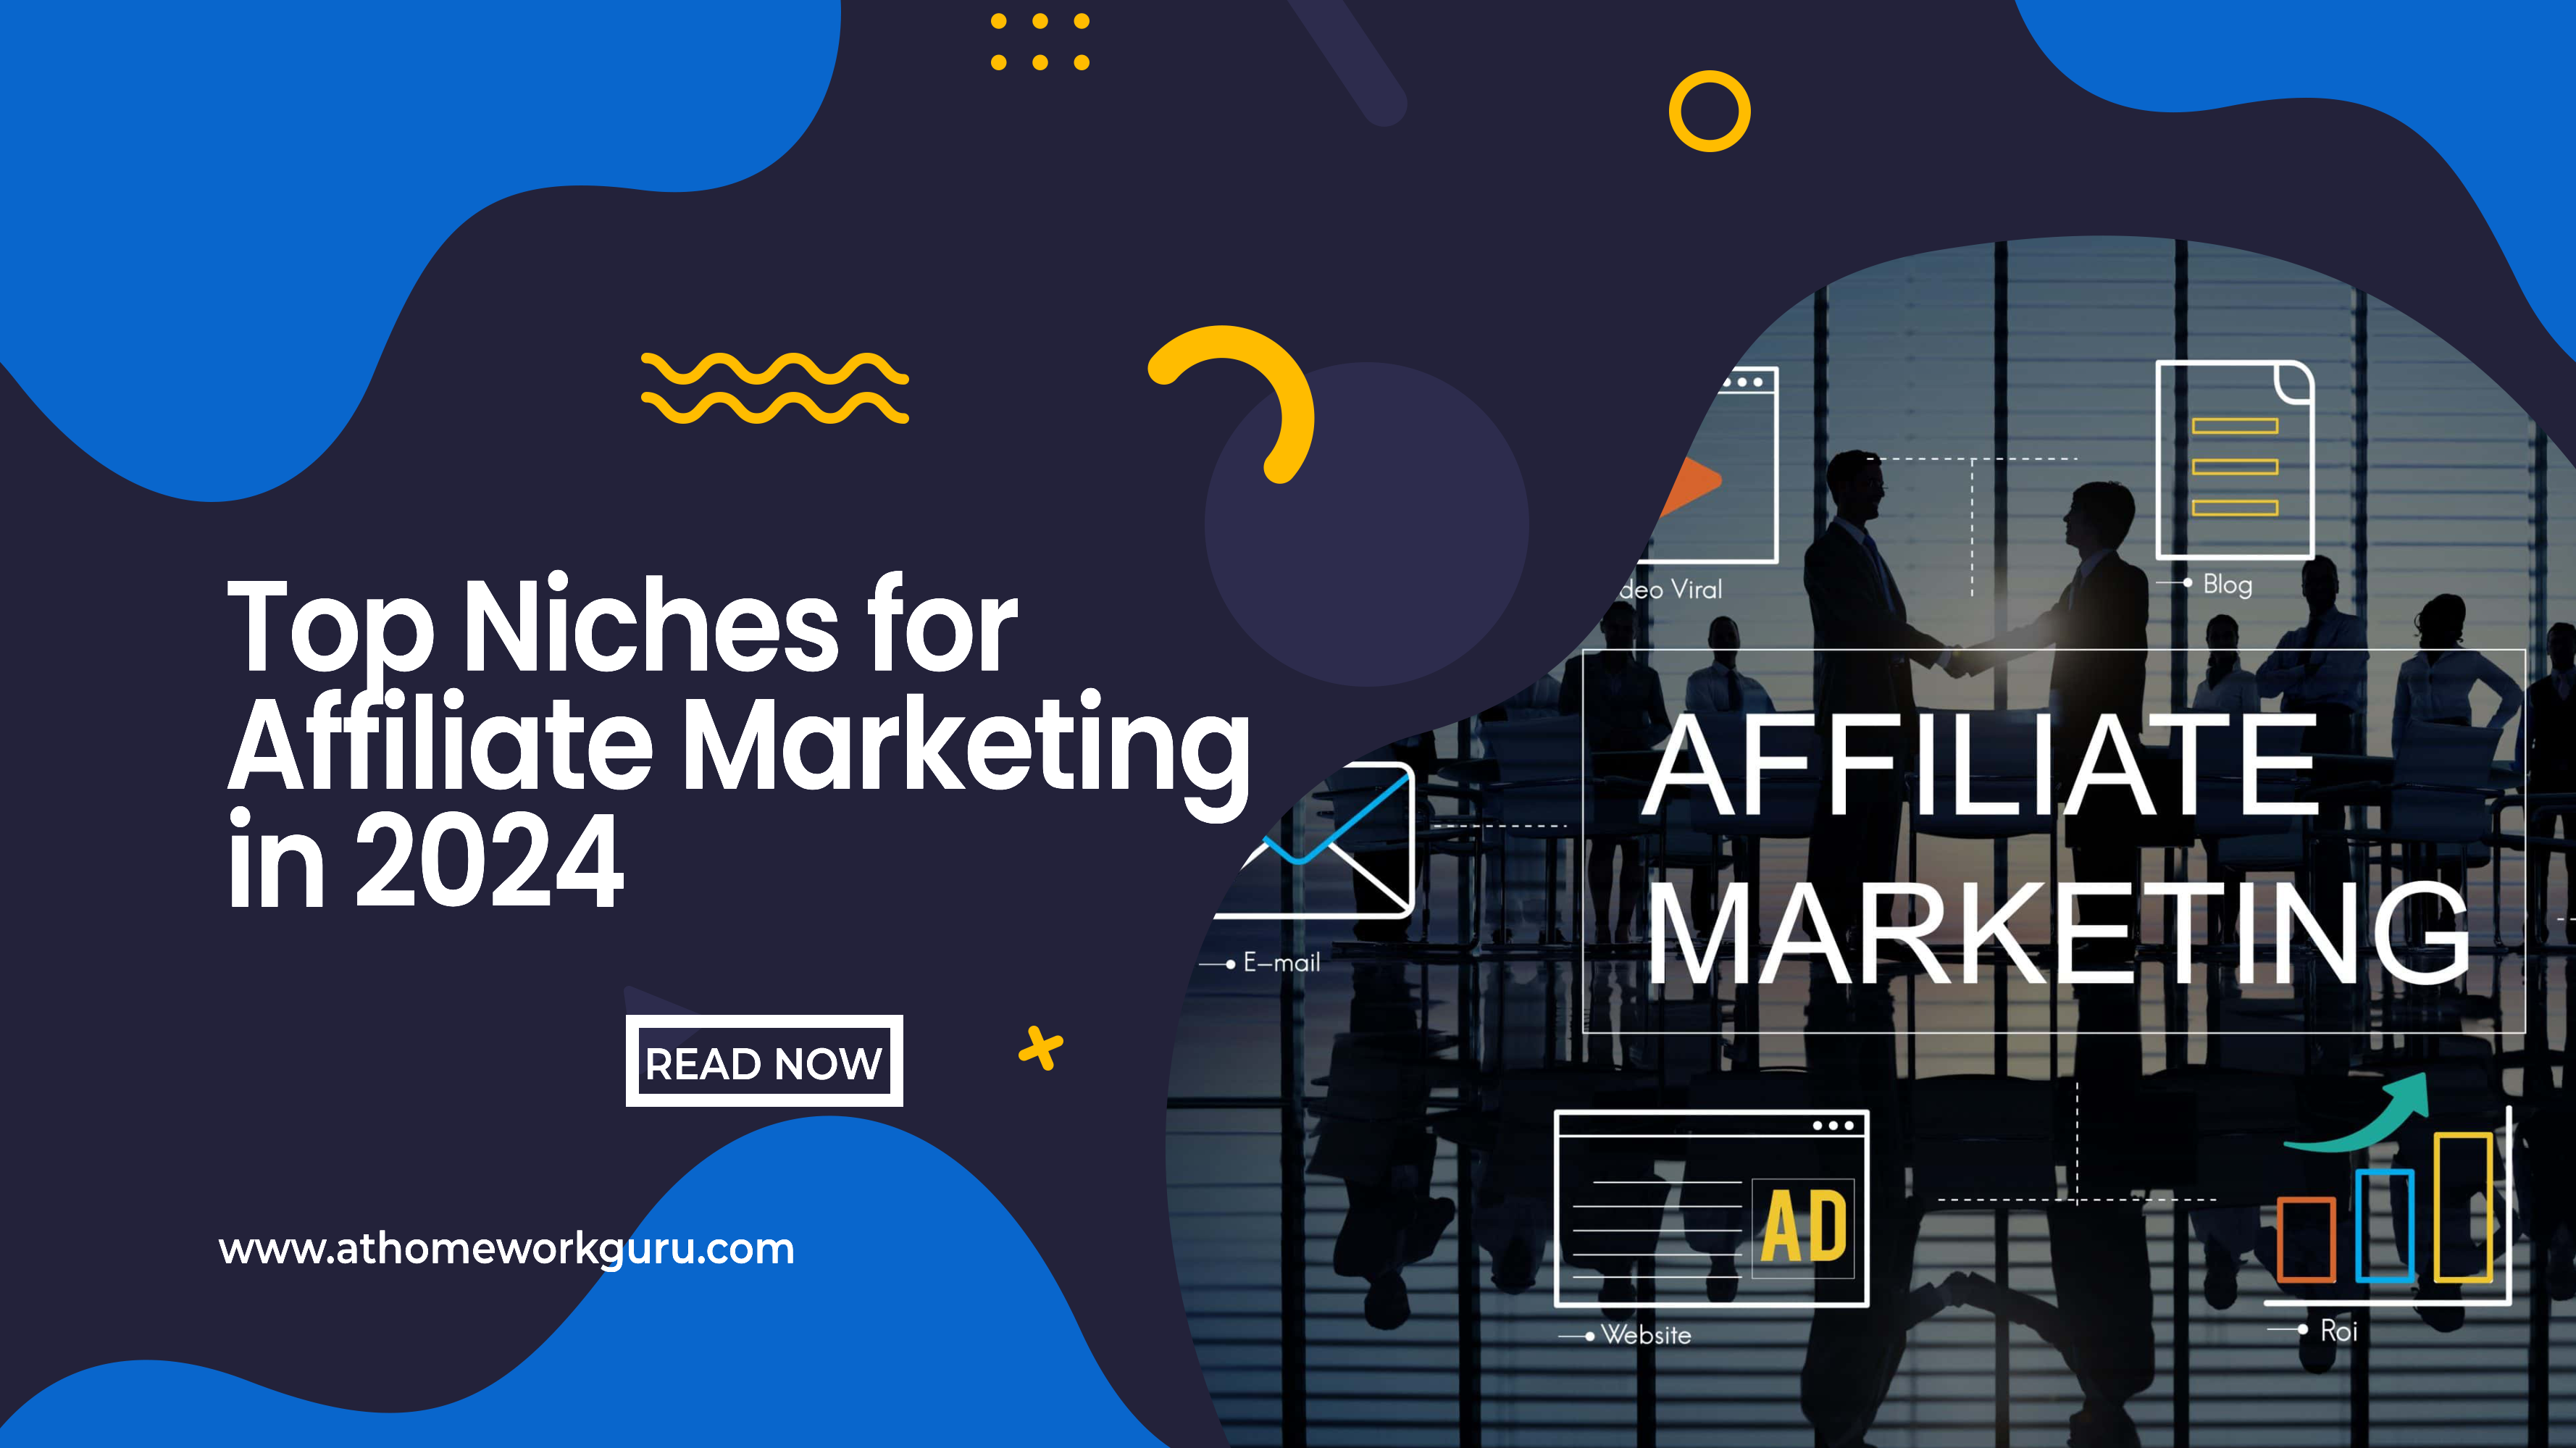 Top Niches for Affiliate Marketing in 2024 Emerging Trends At Home